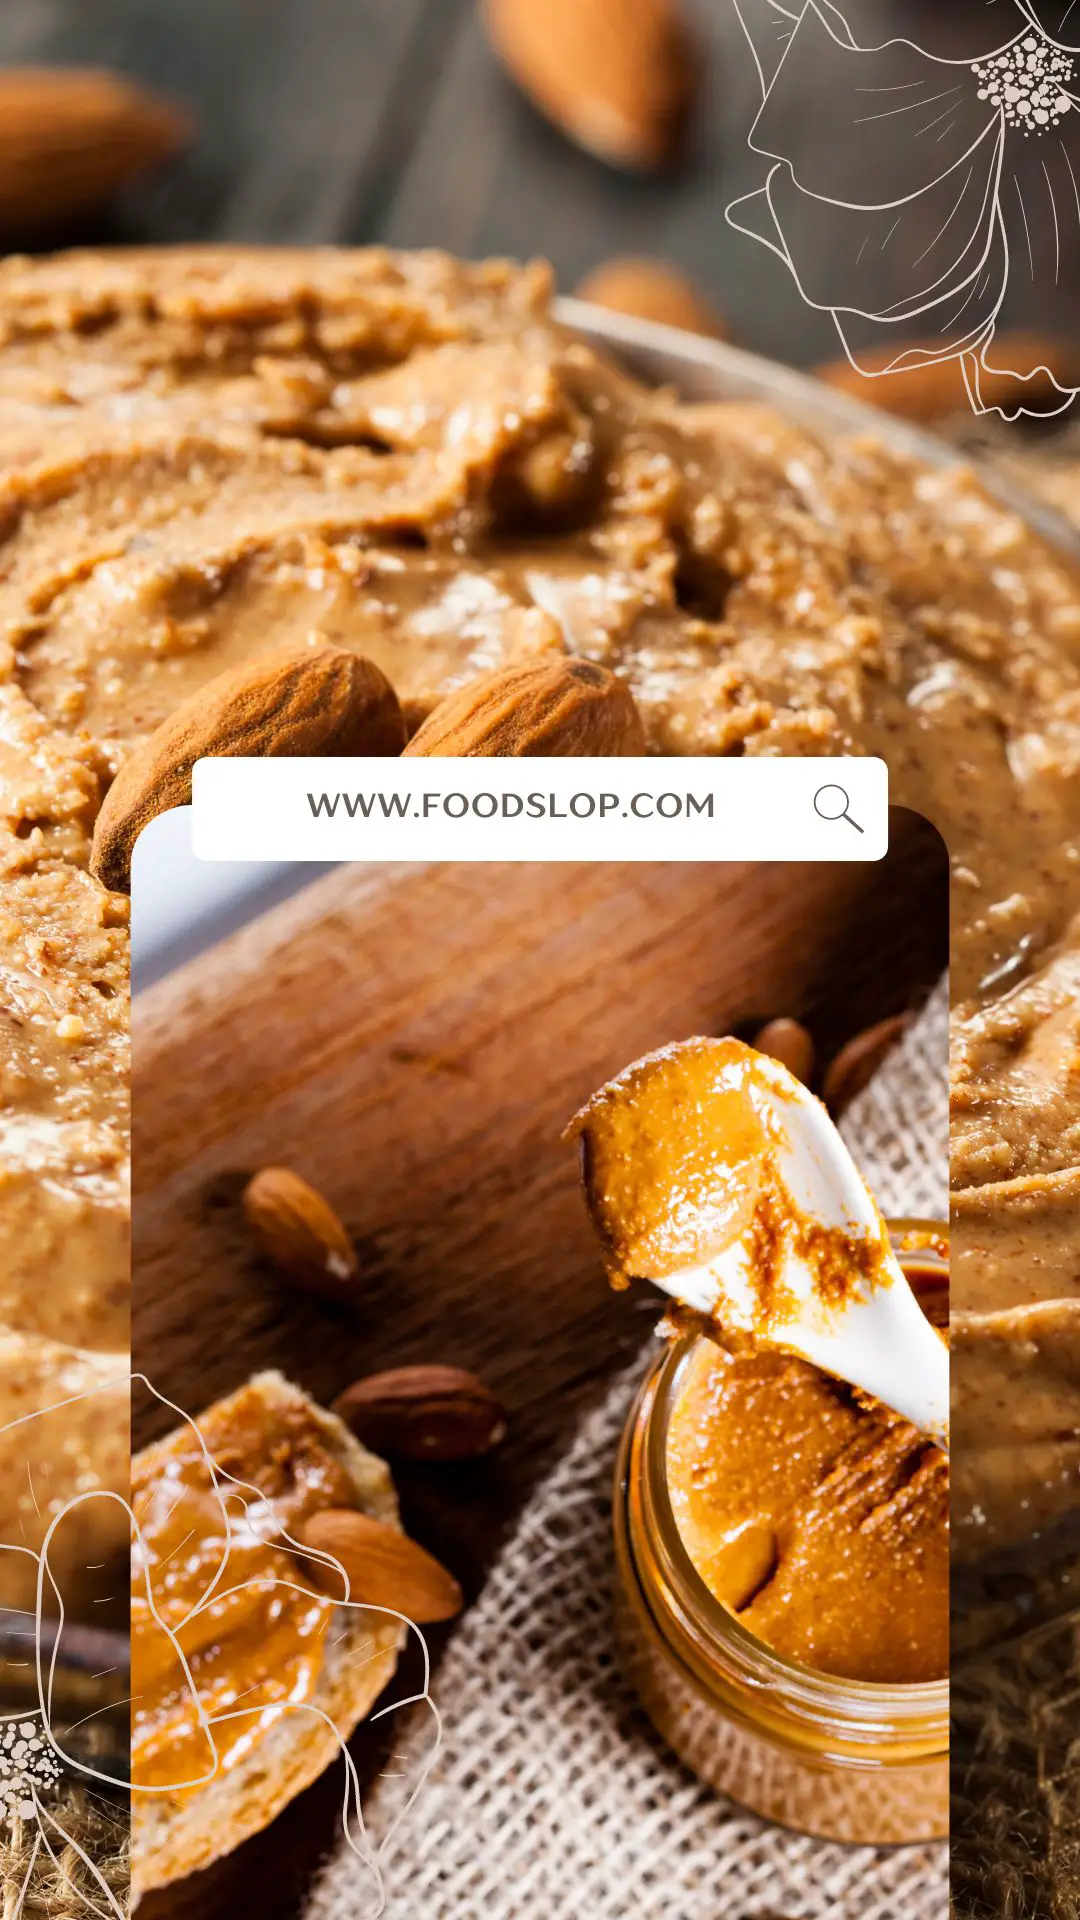 Why I Am Craving Almond Butter